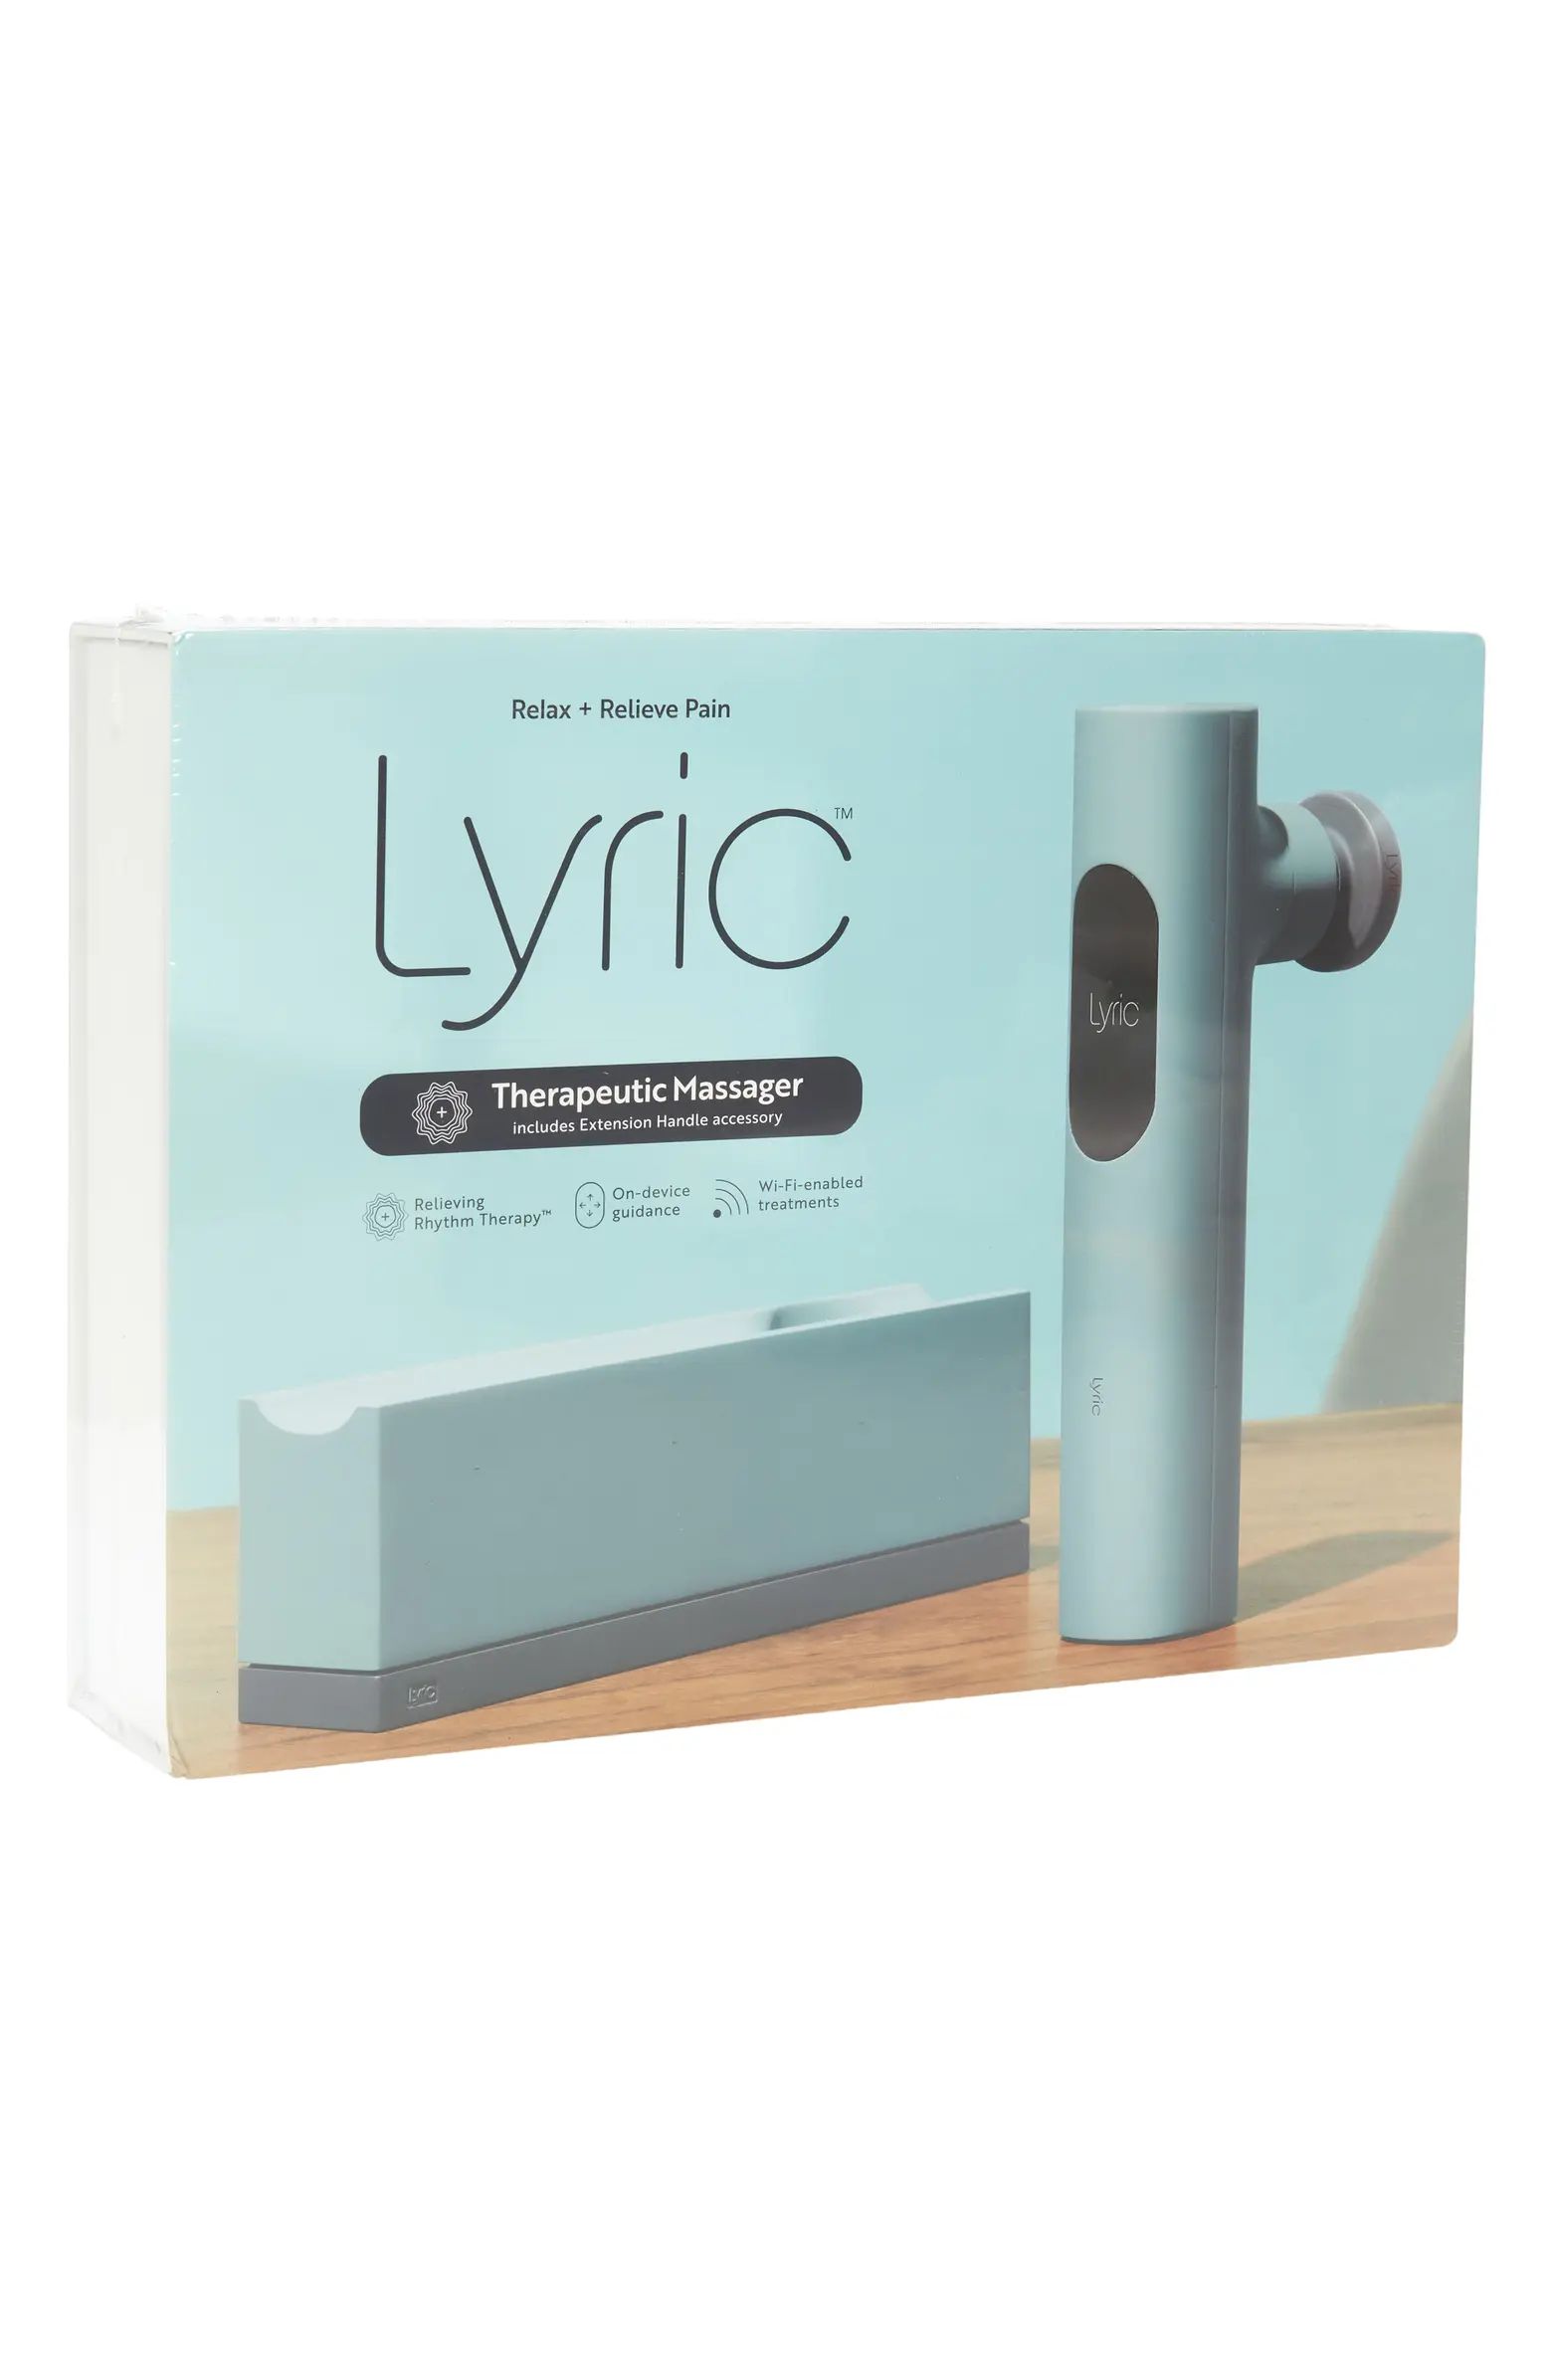 LYRIC The Lyric Therapeutic Handheld Massager Device | Nordstrom | Nordstrom